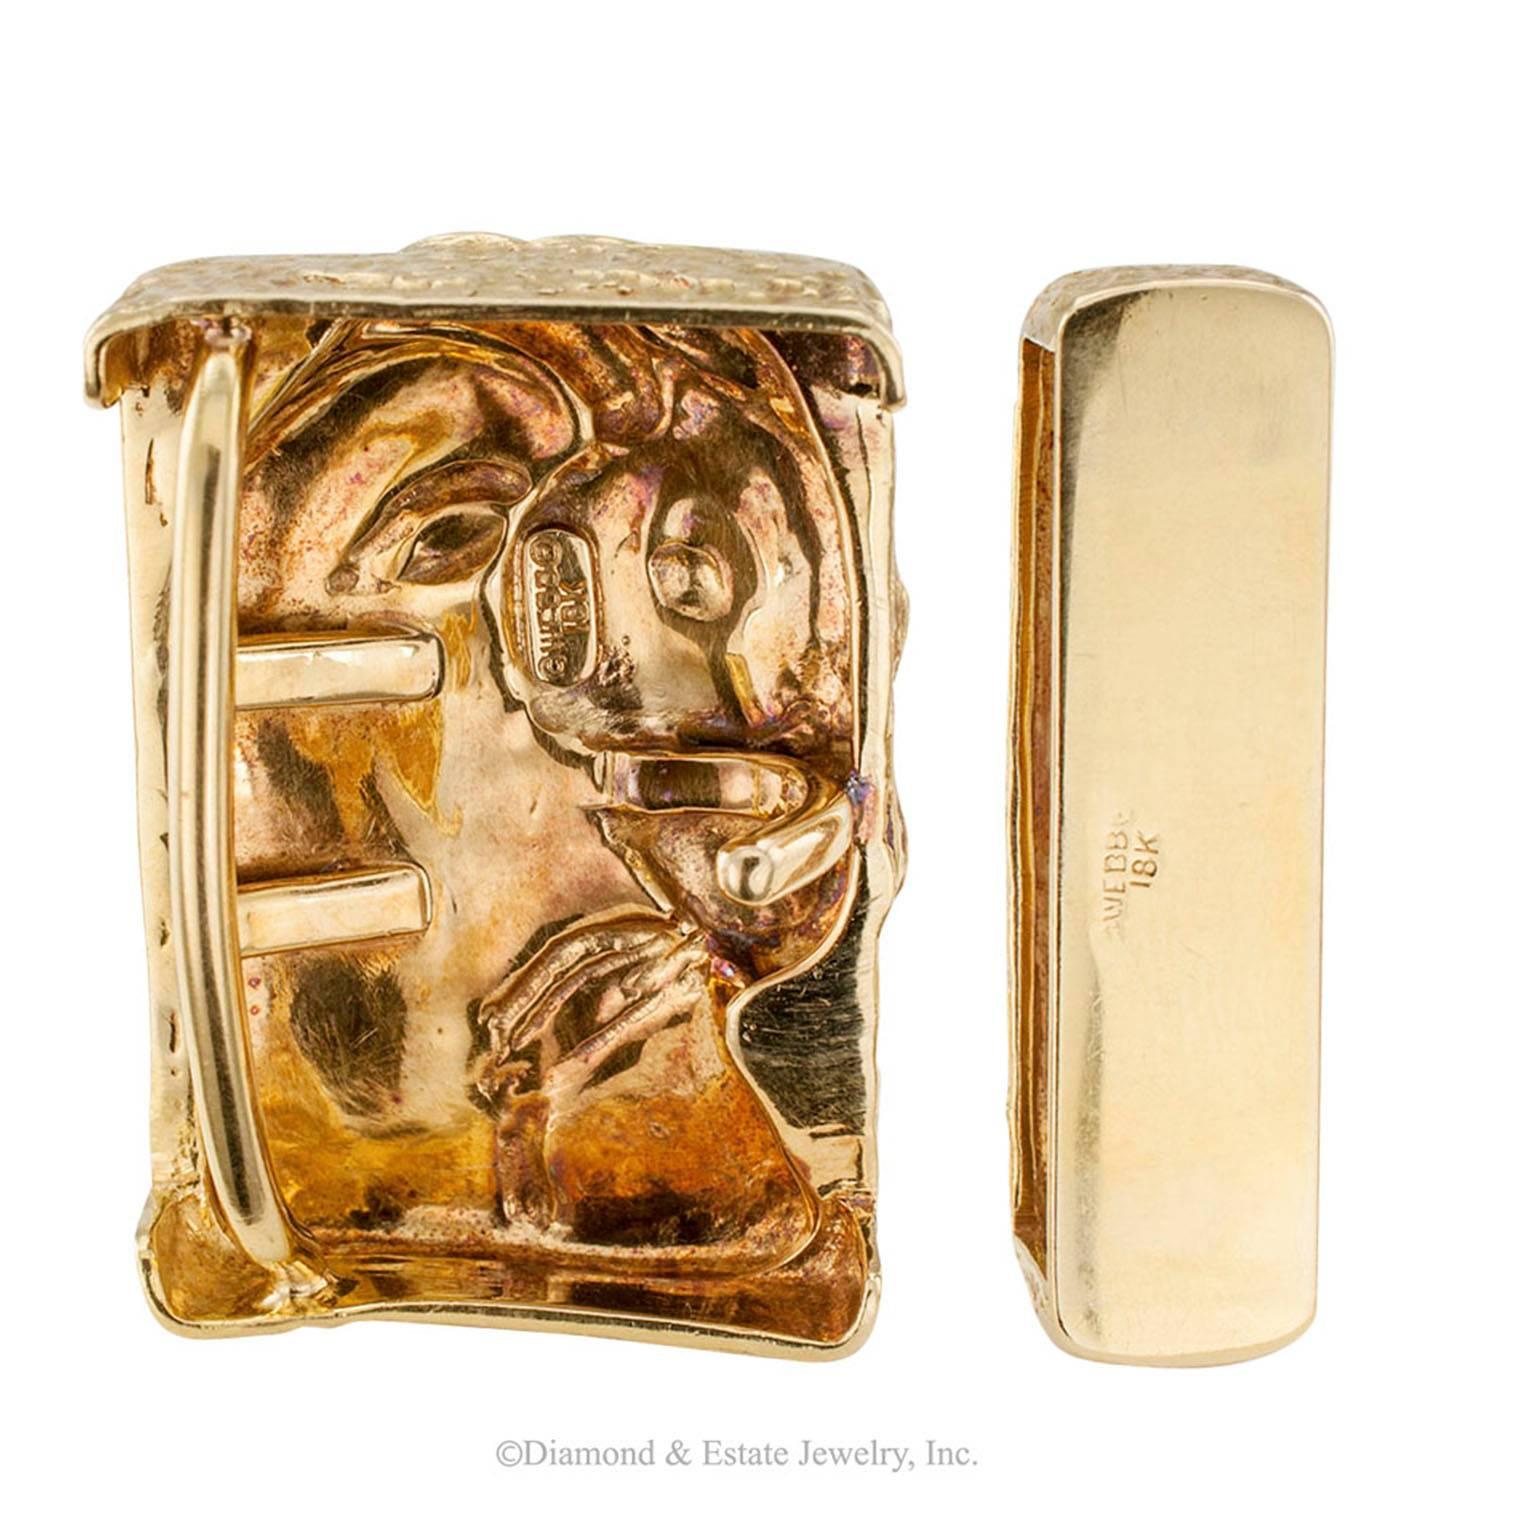 David Webb Capricorn Gold Belt Buckle

David Webb Capricorn gold belt buckle set circa 1960.  Comprising the buckle and coordinated belt loop, crafted in 18-karat yellow gold. The profile of Capricorn astrological symbol in relief on the buckle